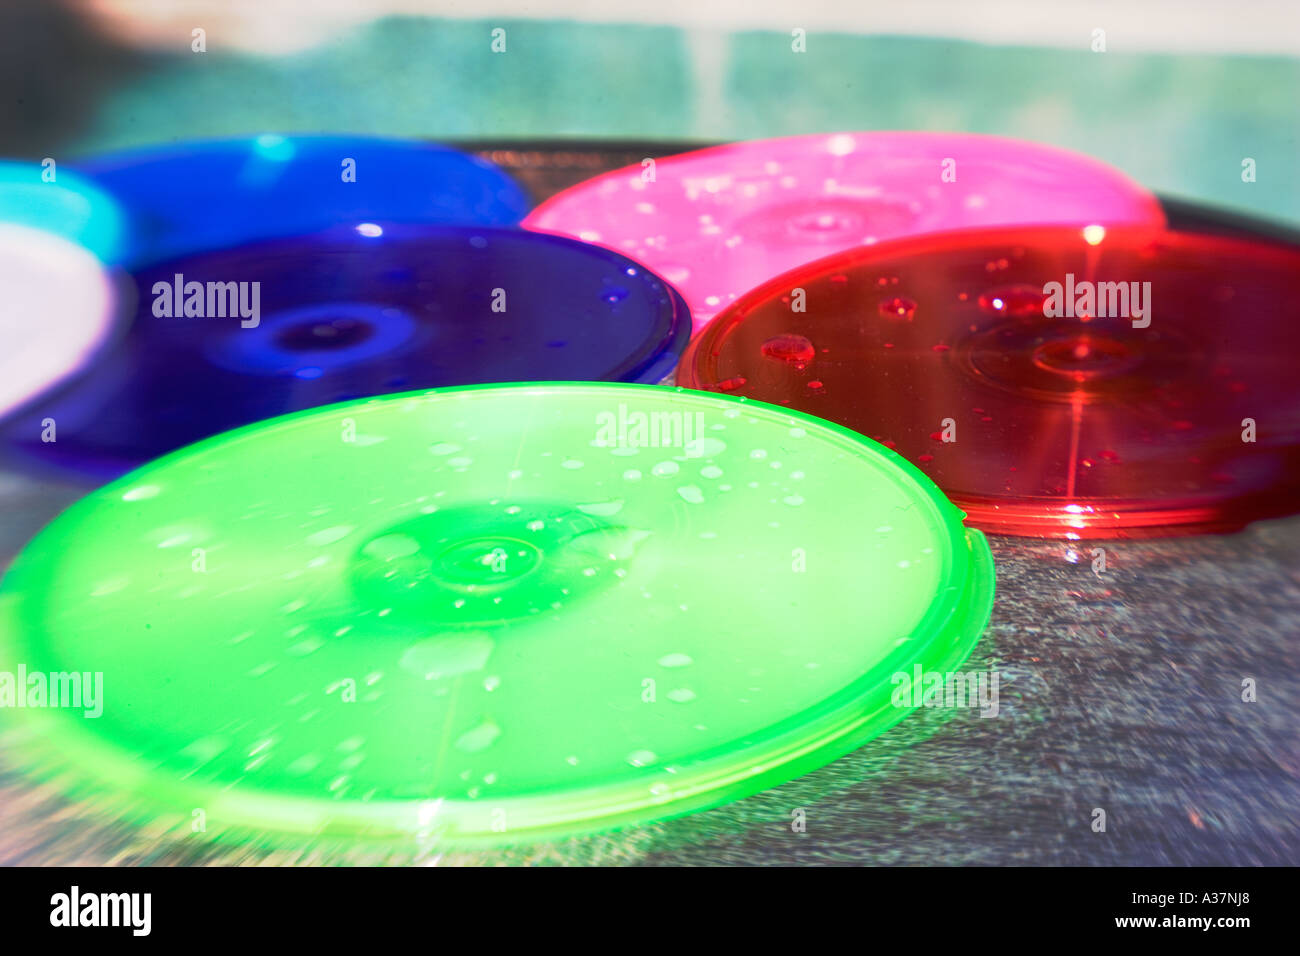 CD DVD container PODZ product beside pool splashed with water Stock Photo